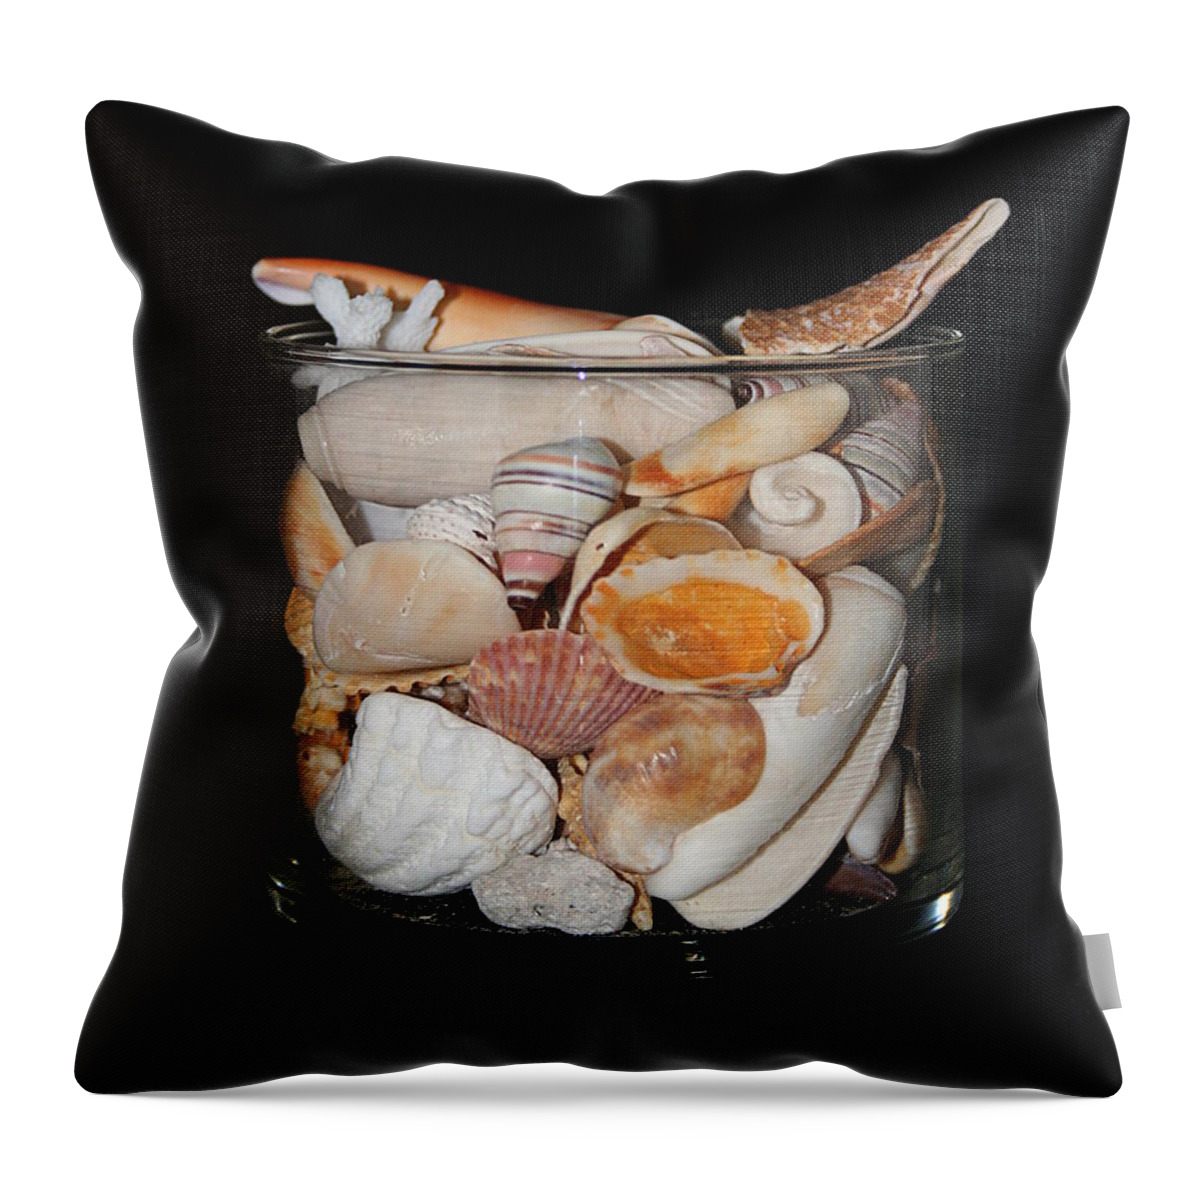 Shells Photographs Throw Pillow featuring the photograph A Glass Of Seashells by Ester McGuire